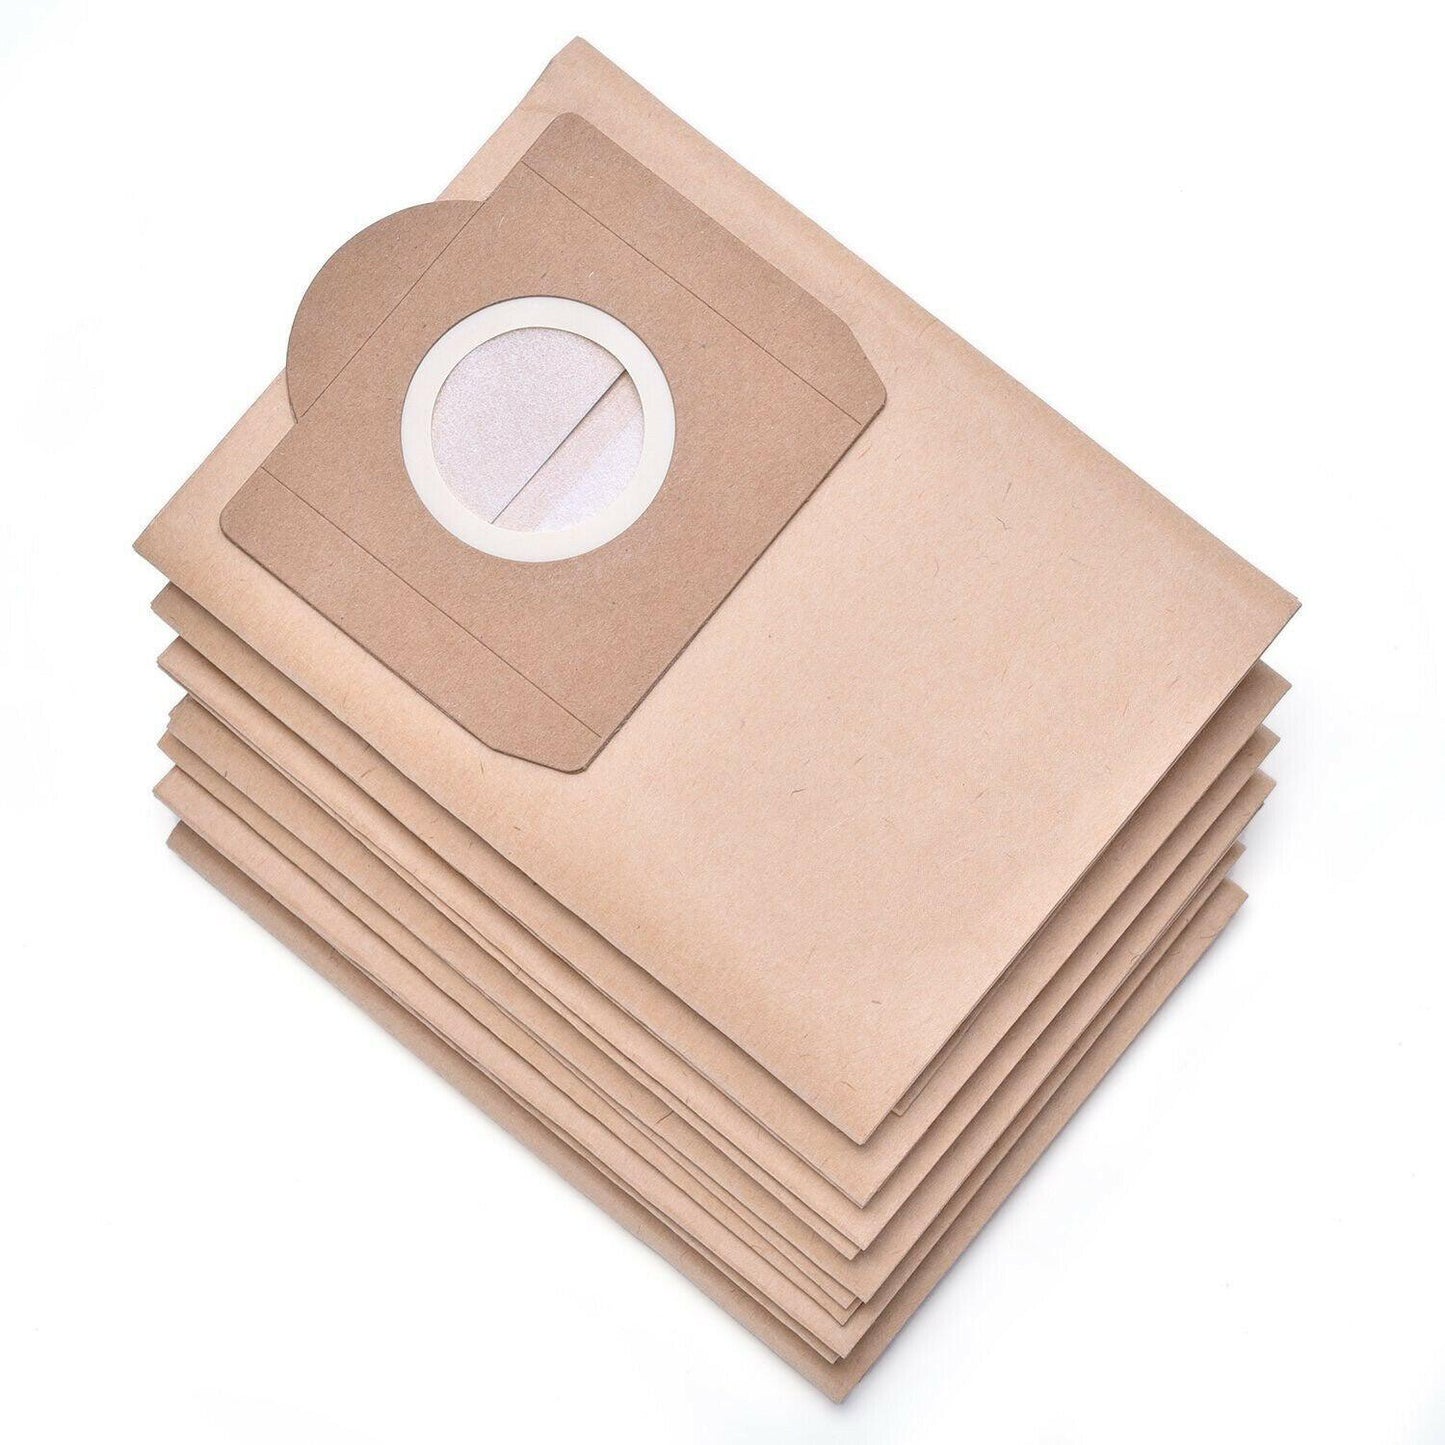 6x Vacuum Paper Dust Bags For Karcher 6.959-130.08 69591300 Wet & Dry Sparesbarn